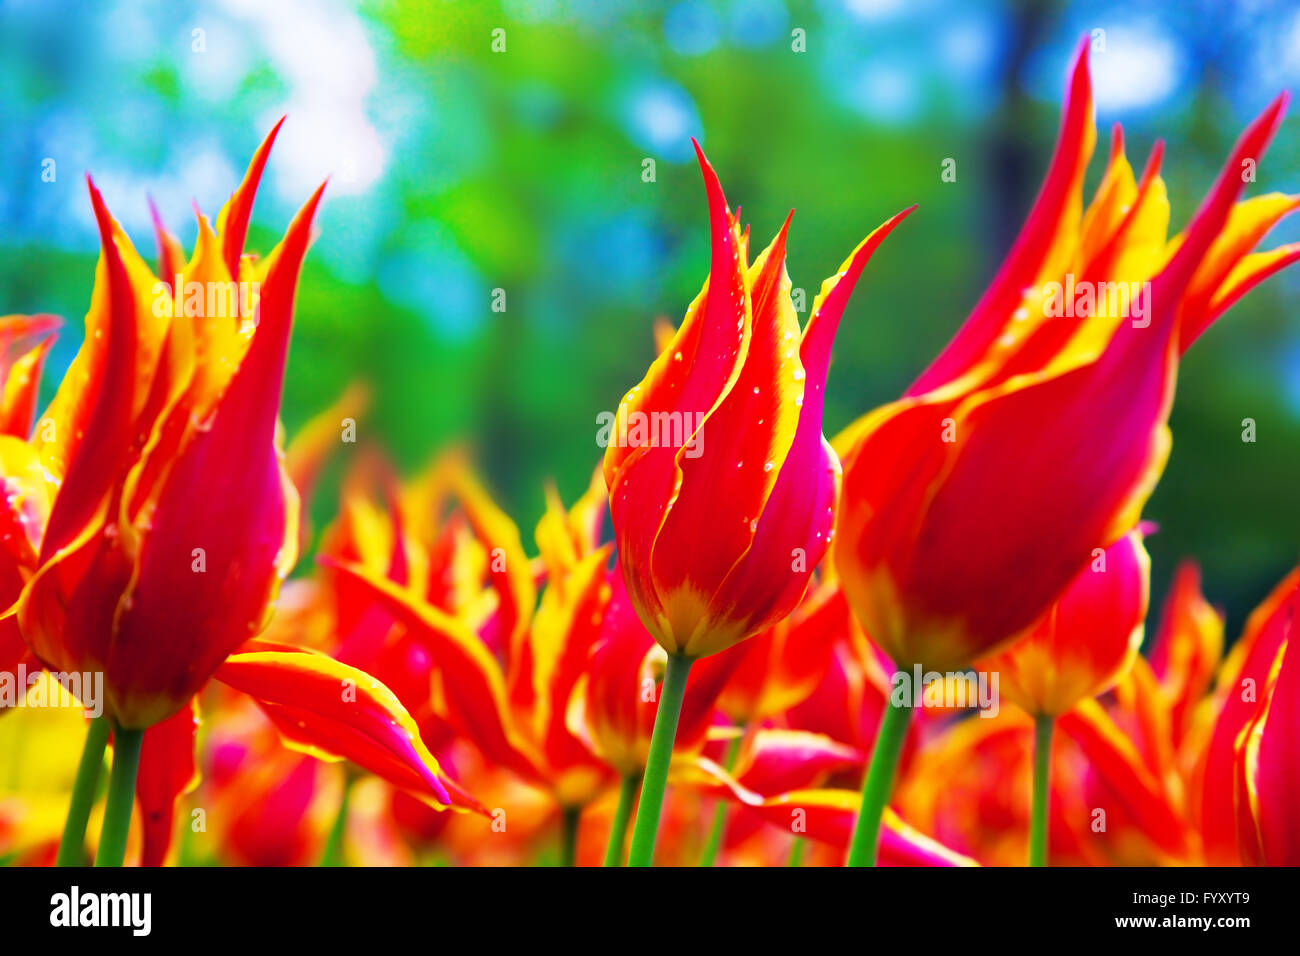 Colorful tulip flowers in spring Stock Photo